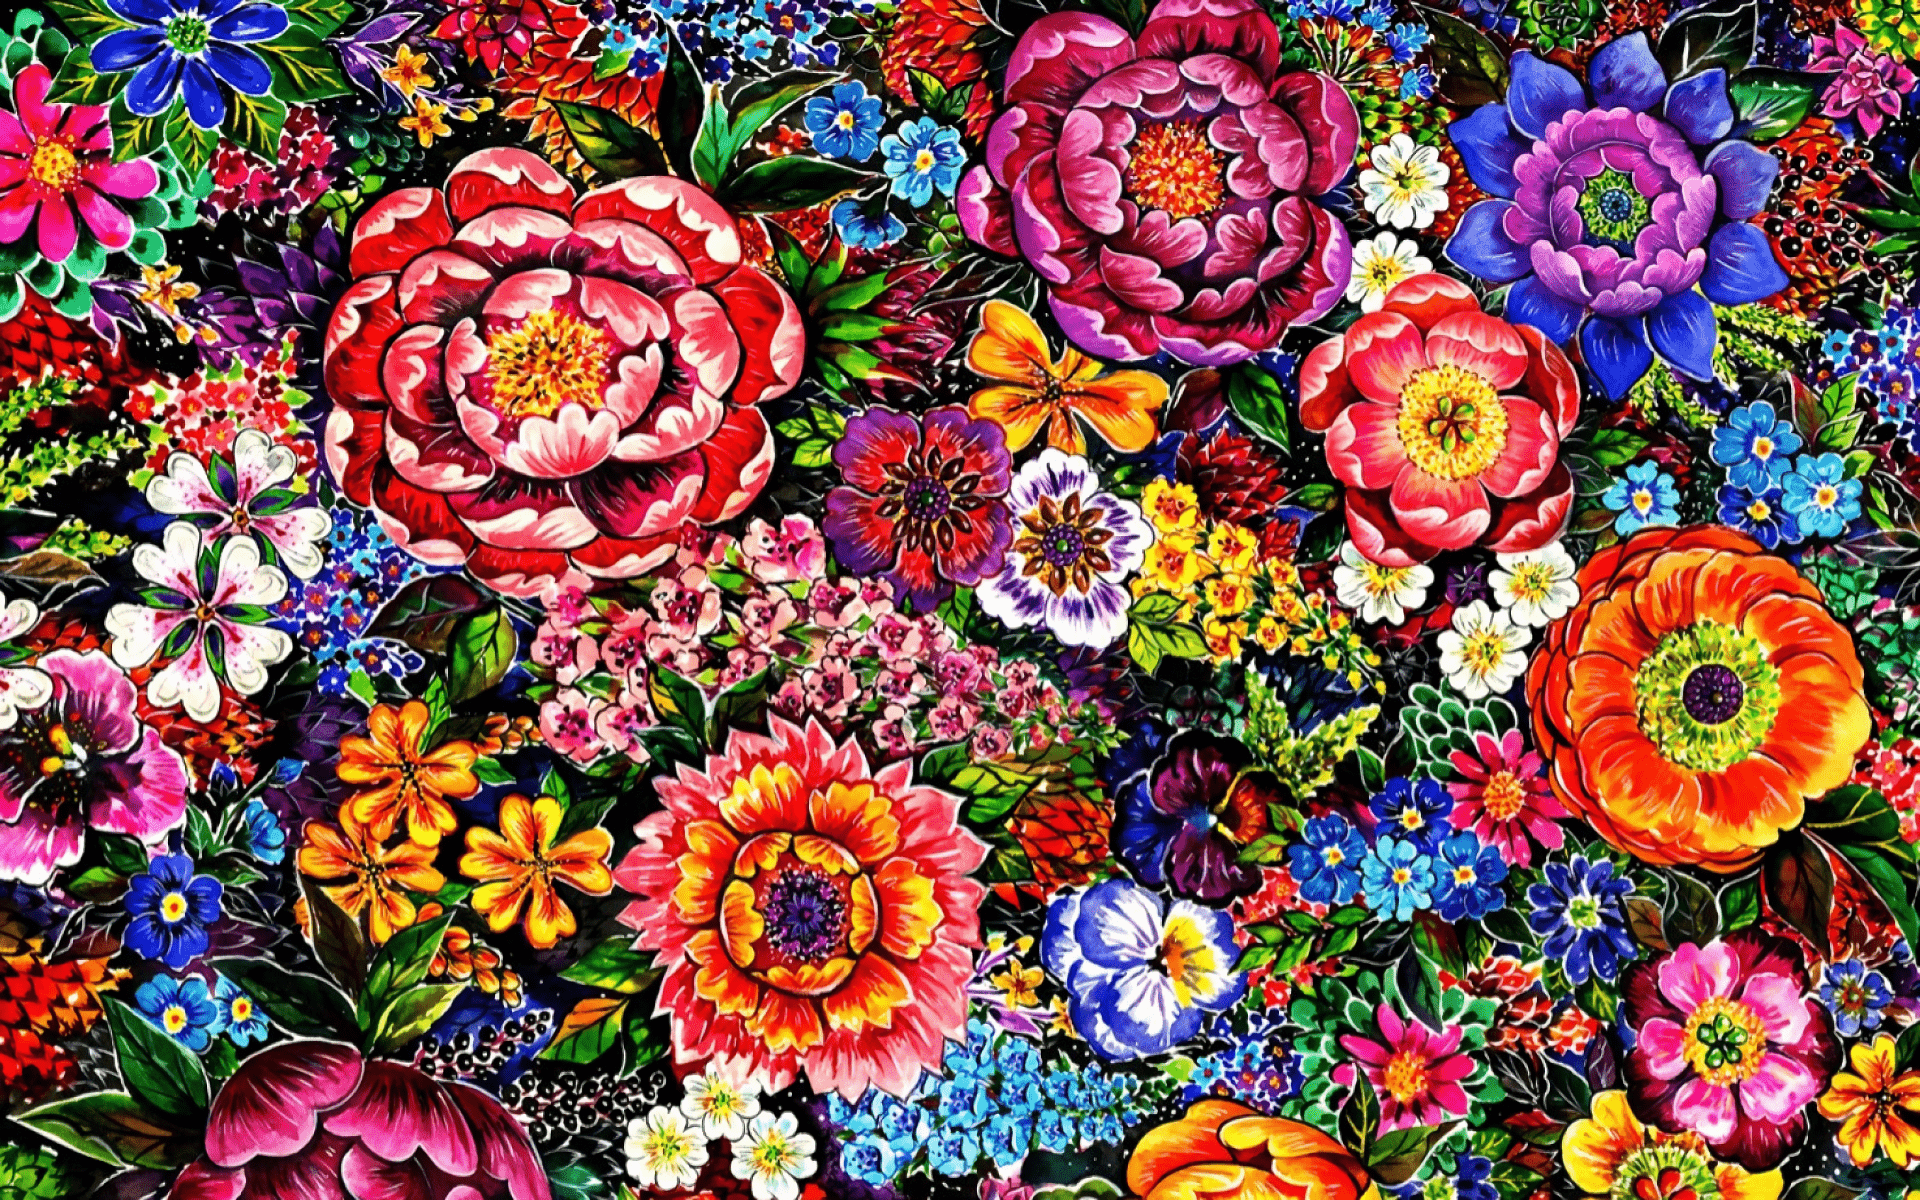 Flower Painting Wallpapers - Top Free Flower Painting Backgrounds - WallpaperAccess